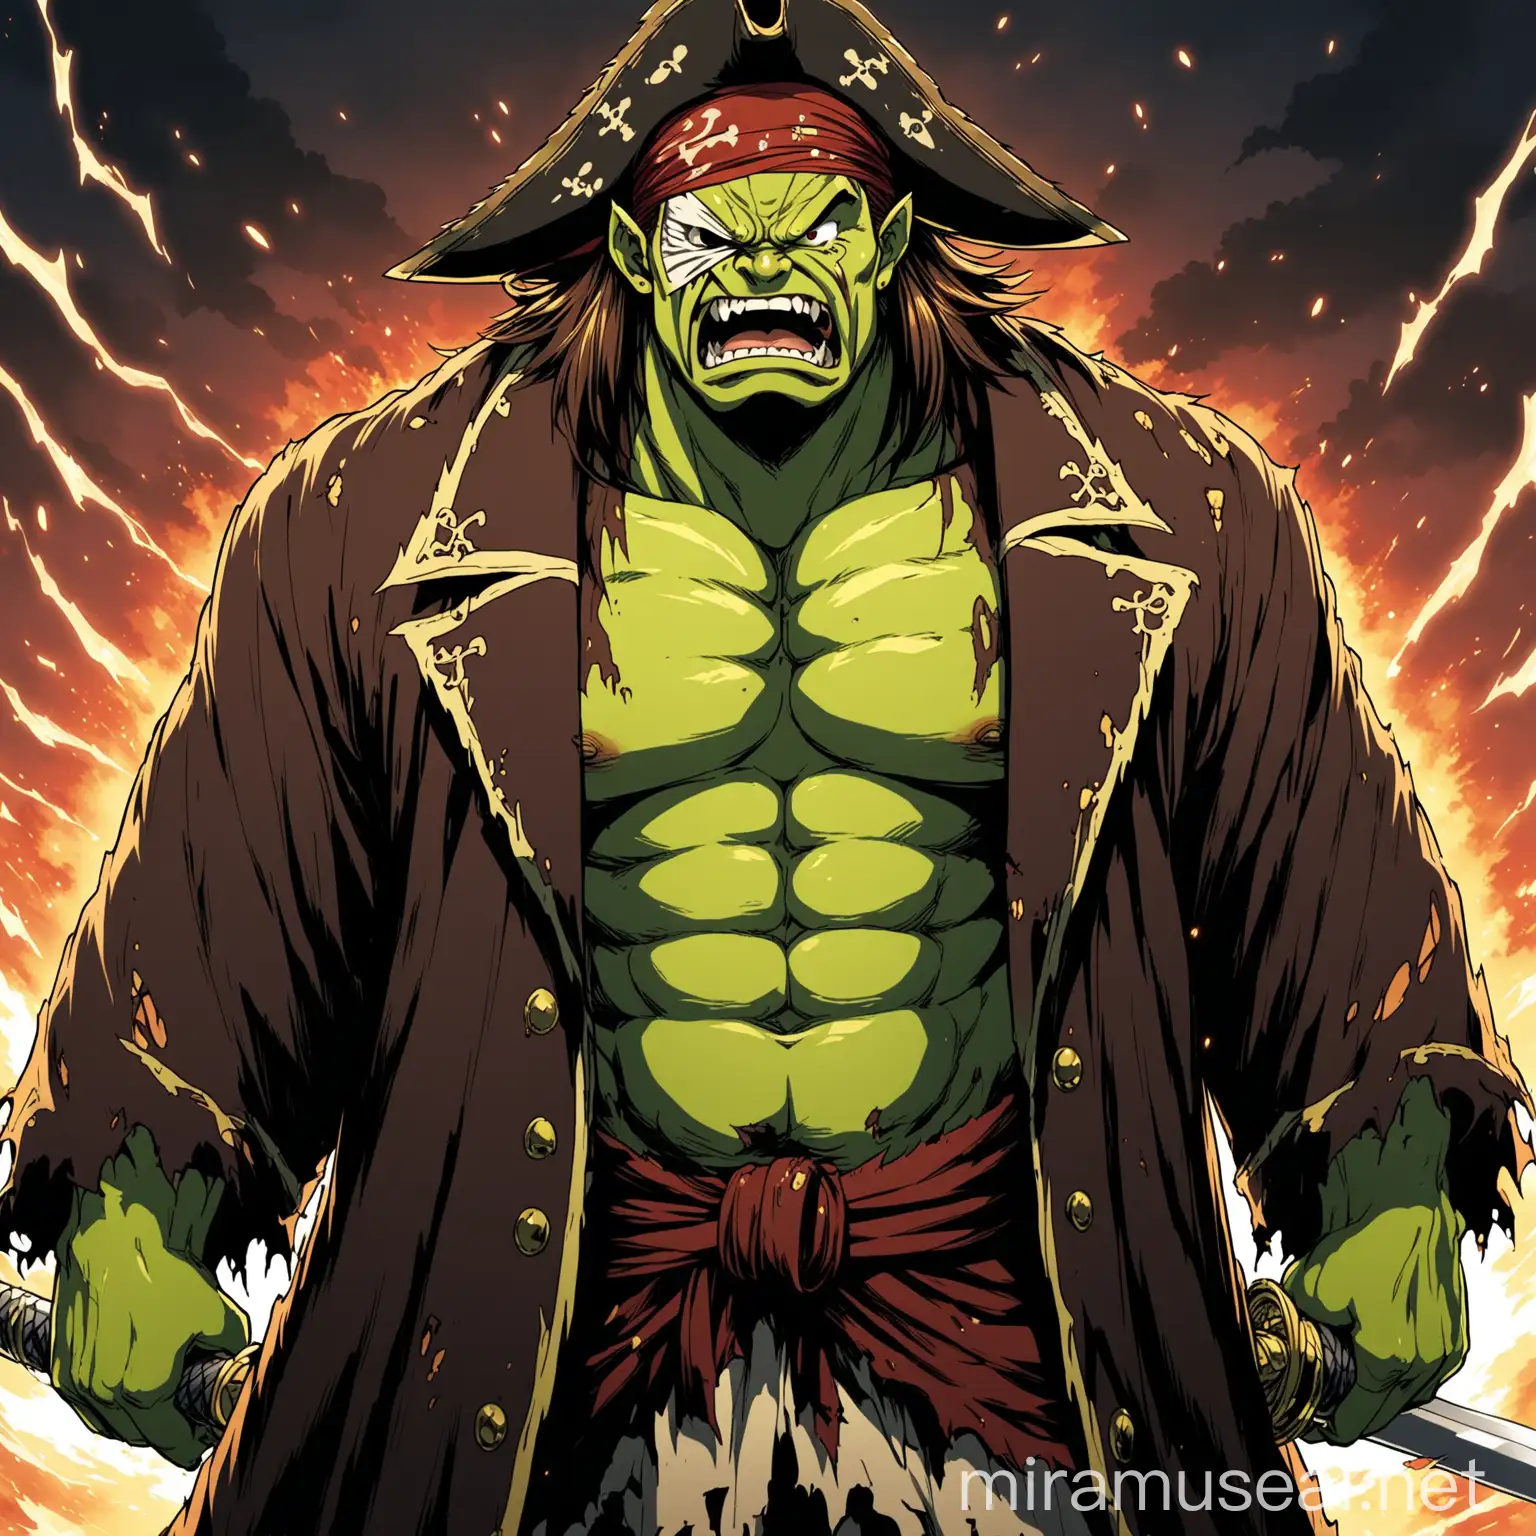 a pirate ogre who is holding two sabers, he is missing an eye, his clothes are torn, he has a menacing expression. in anime